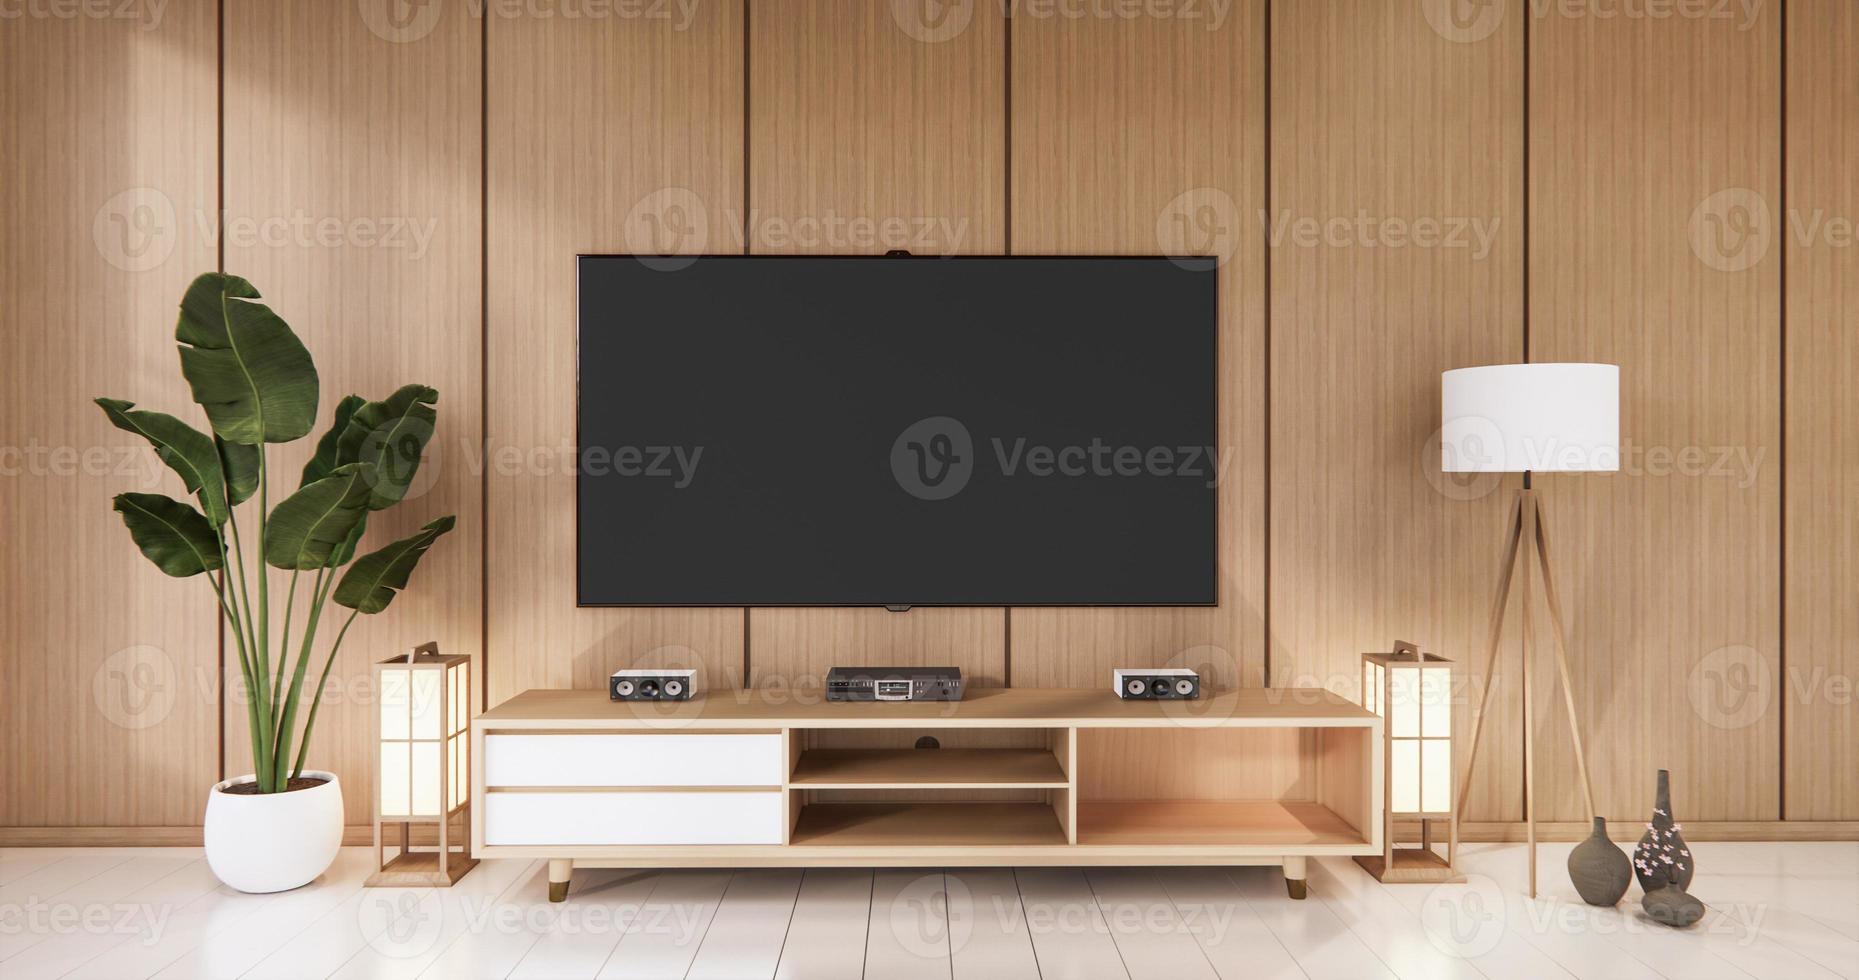 Tv on empty wall background and wall wooden japanese design on living room zen style.3D rendering photo